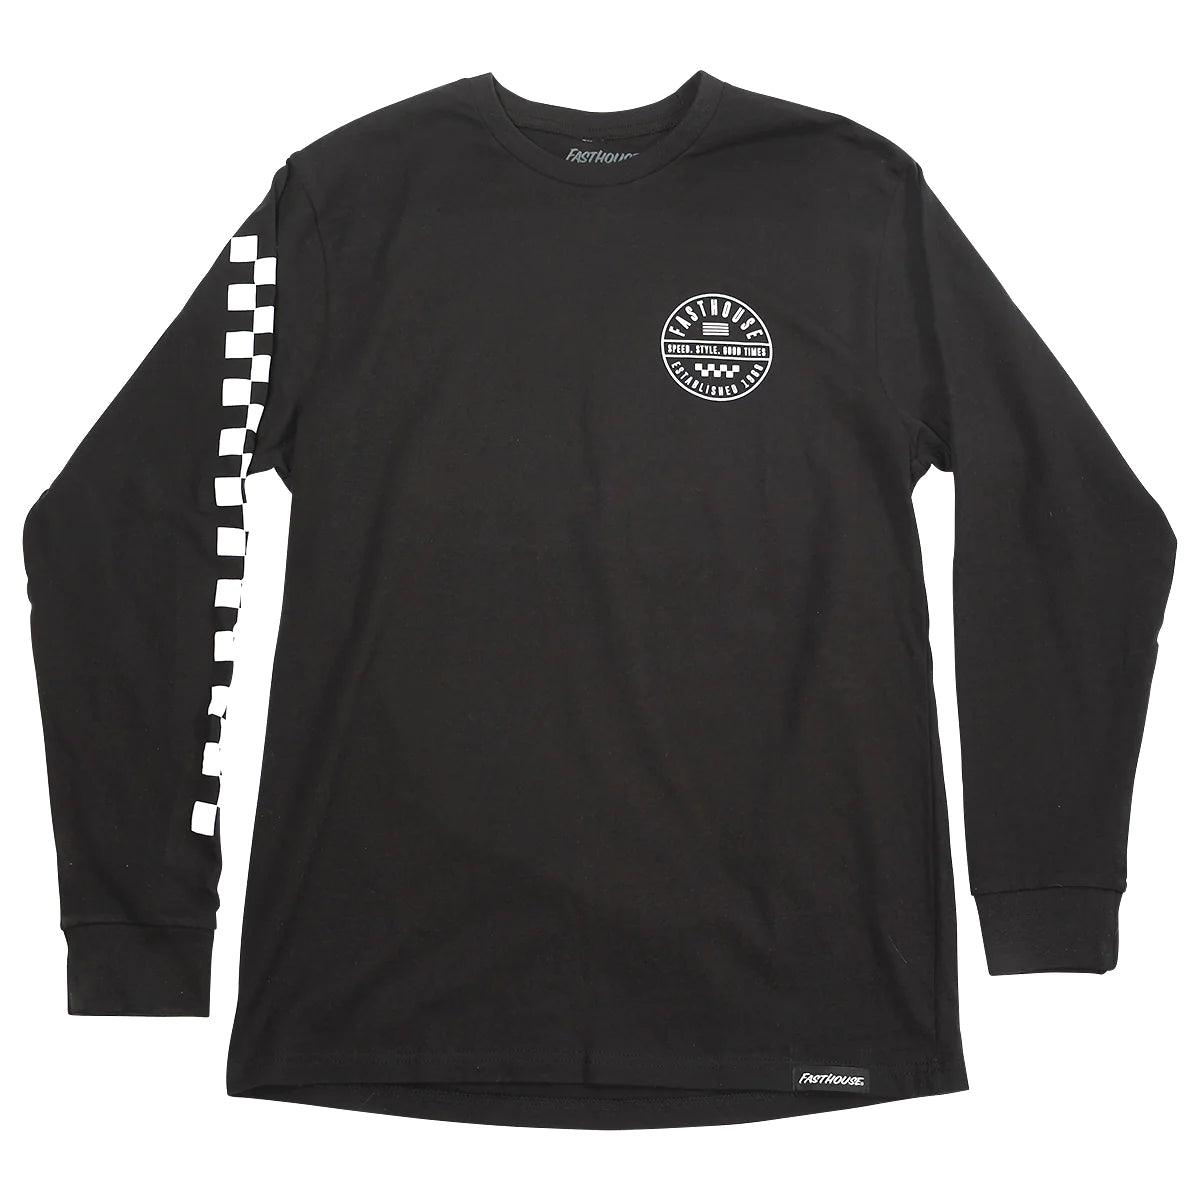 Statement L/S Tee - Black - Purpose-Built / Home of the Trades